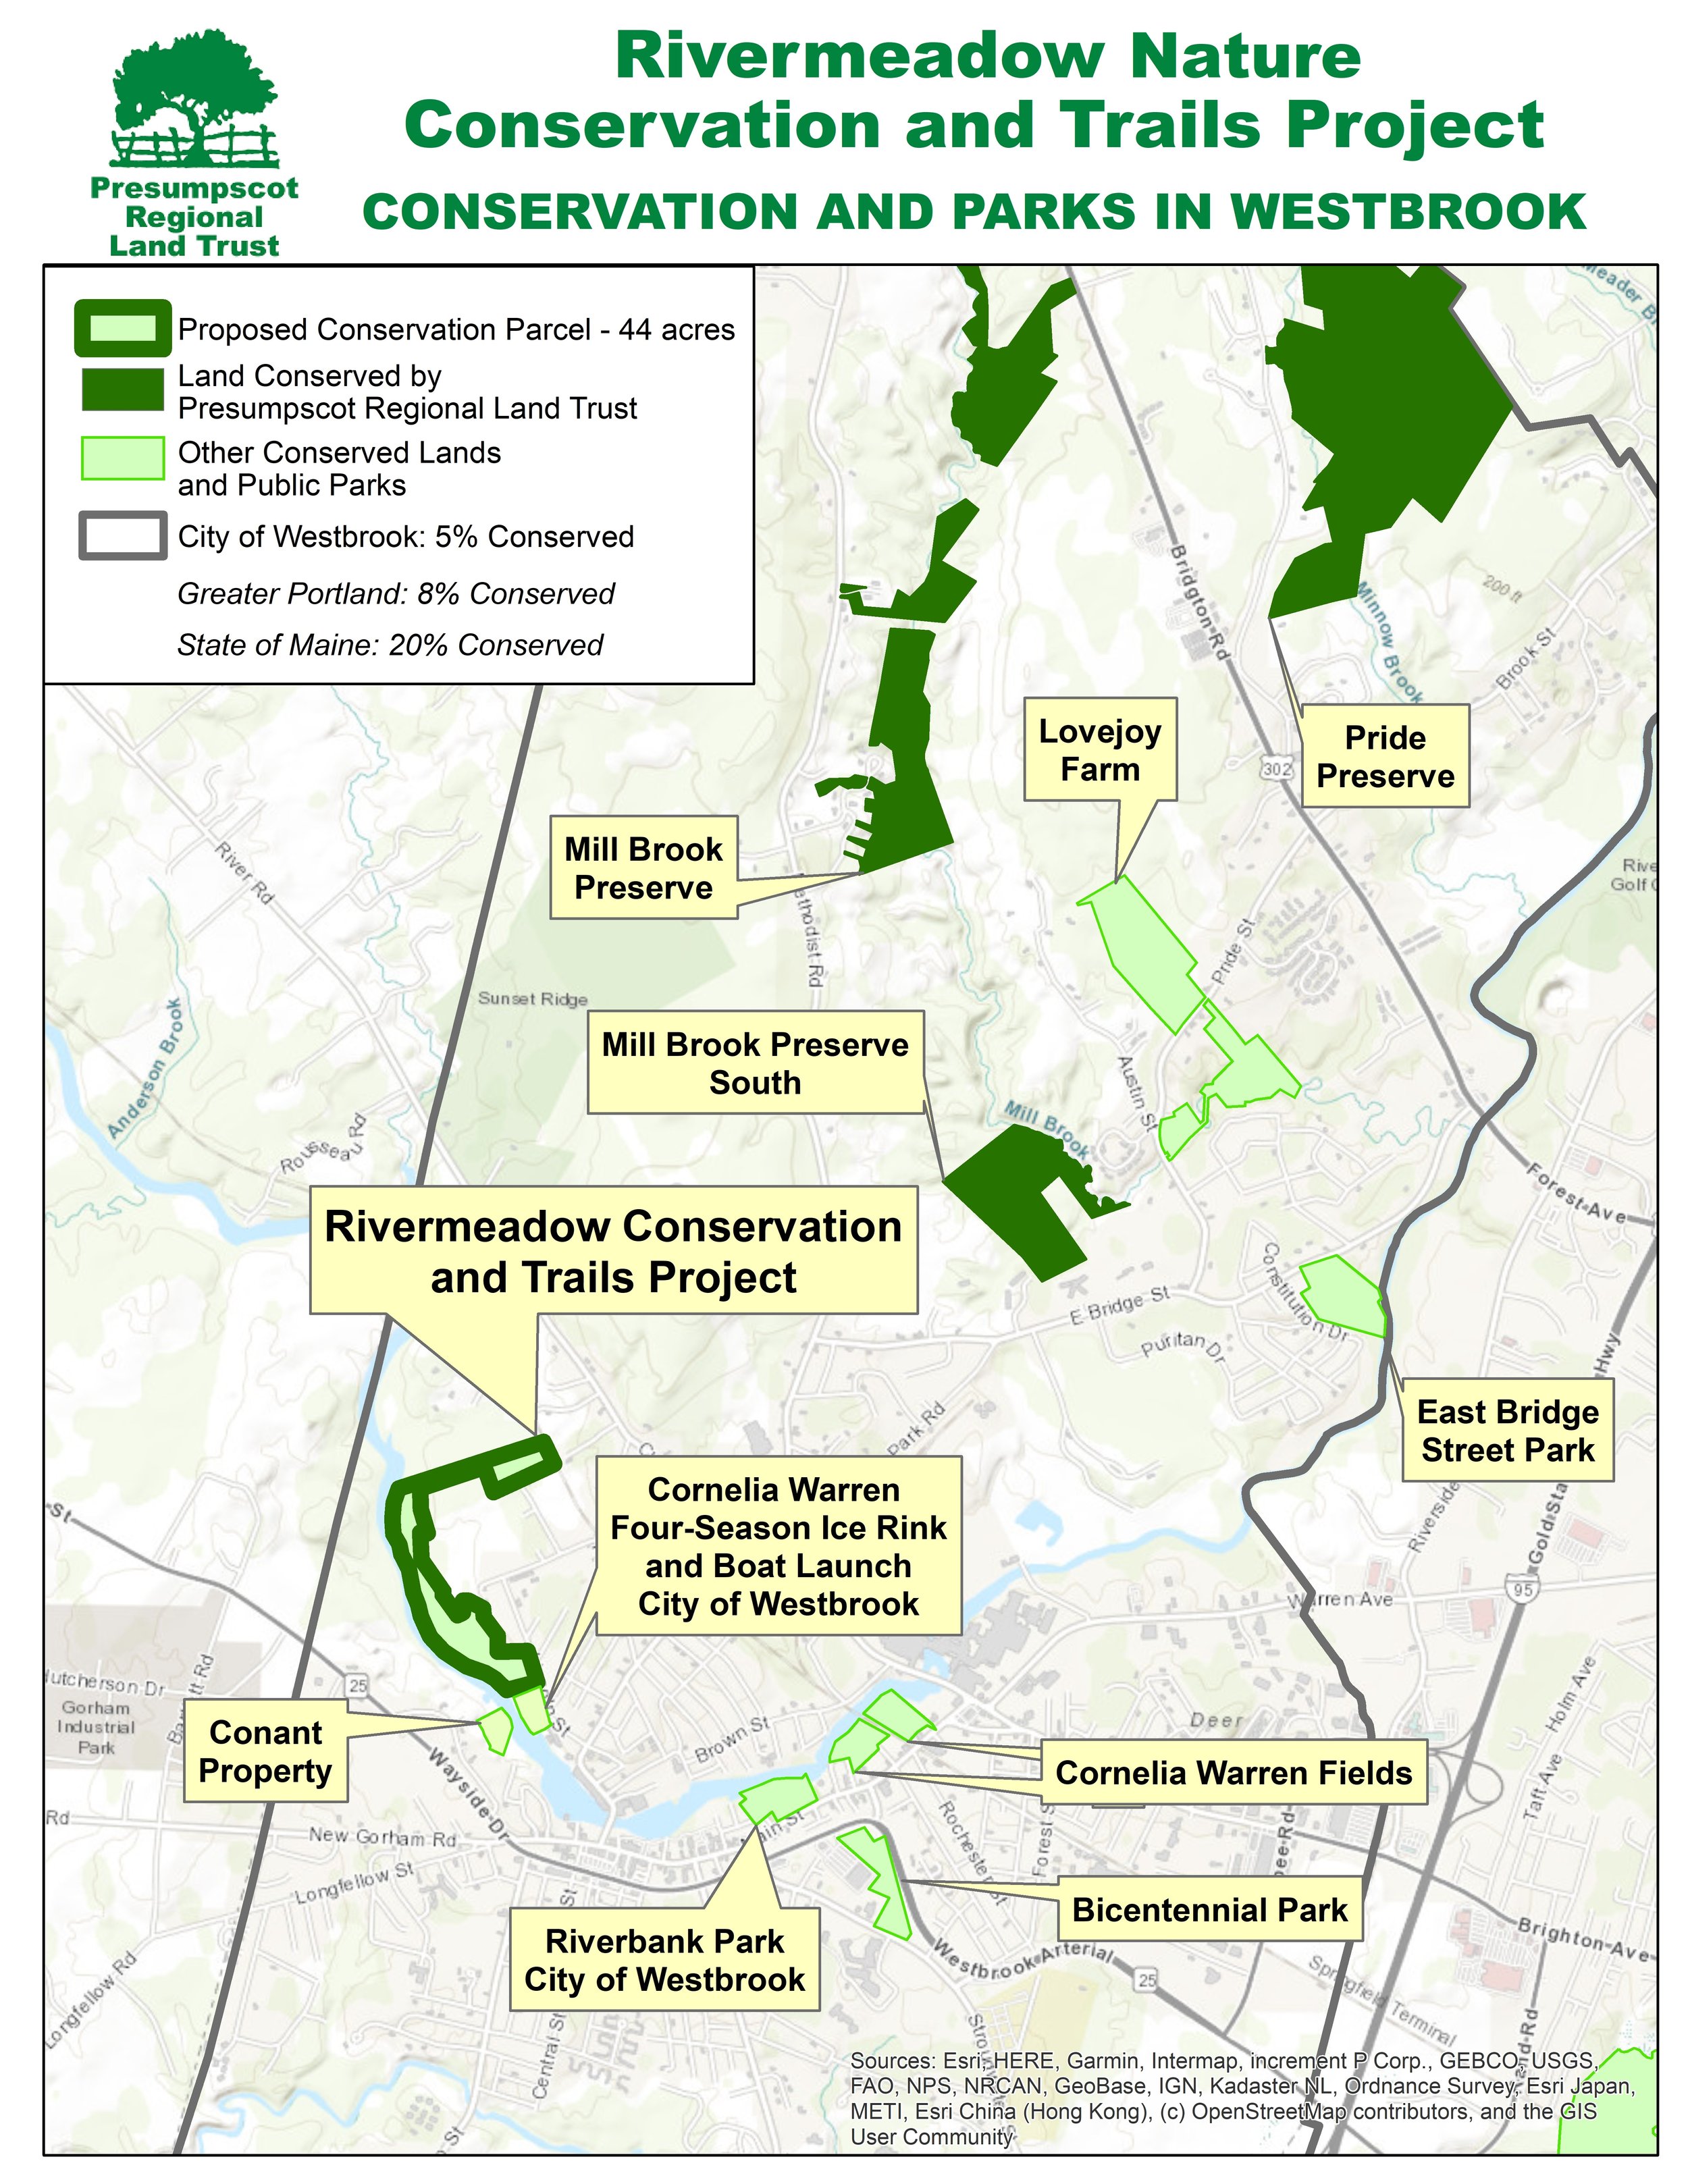 Rivermeadow Nature Conservation Project - Conserved lands and parks.jpg